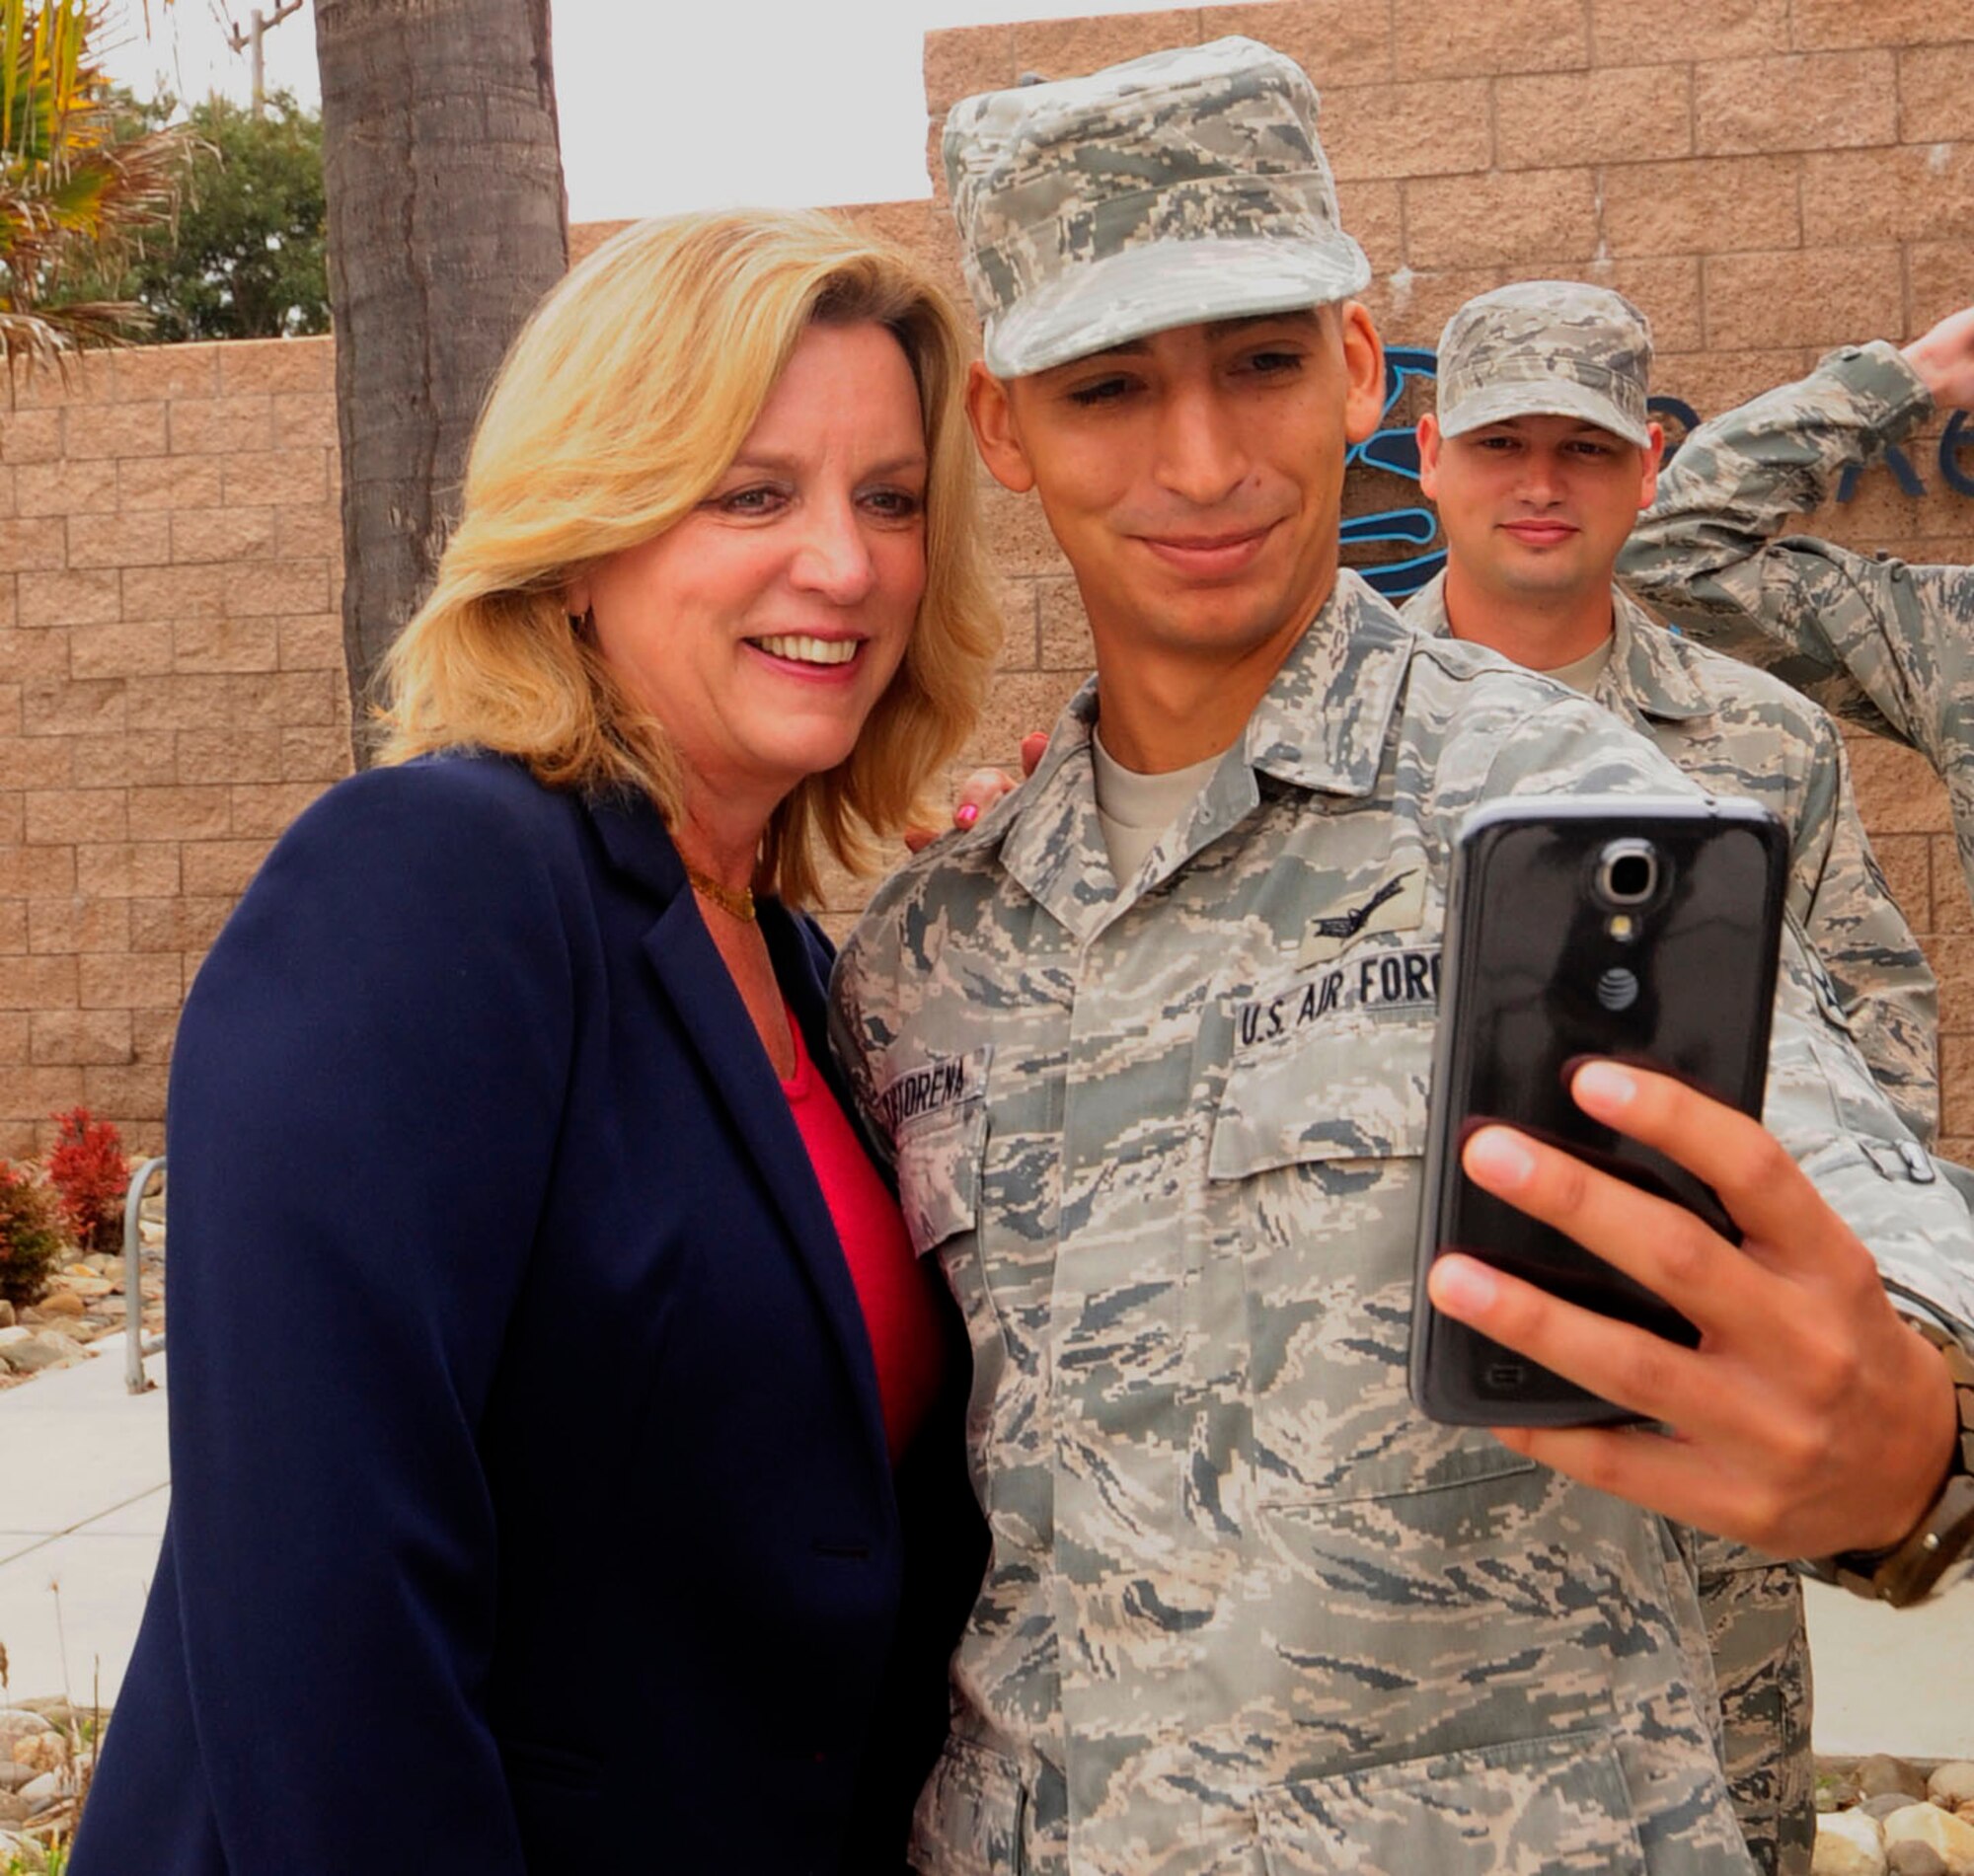 Airmen have the opportunity to take a couple of selfies with Secretary of the Air Force, Deborah Lee James during her visit Sept. 24, 2014, Vandenberg Air Force Base, Calif. The Secretary also gathered with Airmen for a group photo after a meet and greet breakfast. (U.S. Air Force photo by Tech. Sgt. Tyrona Lawson/Released) 


